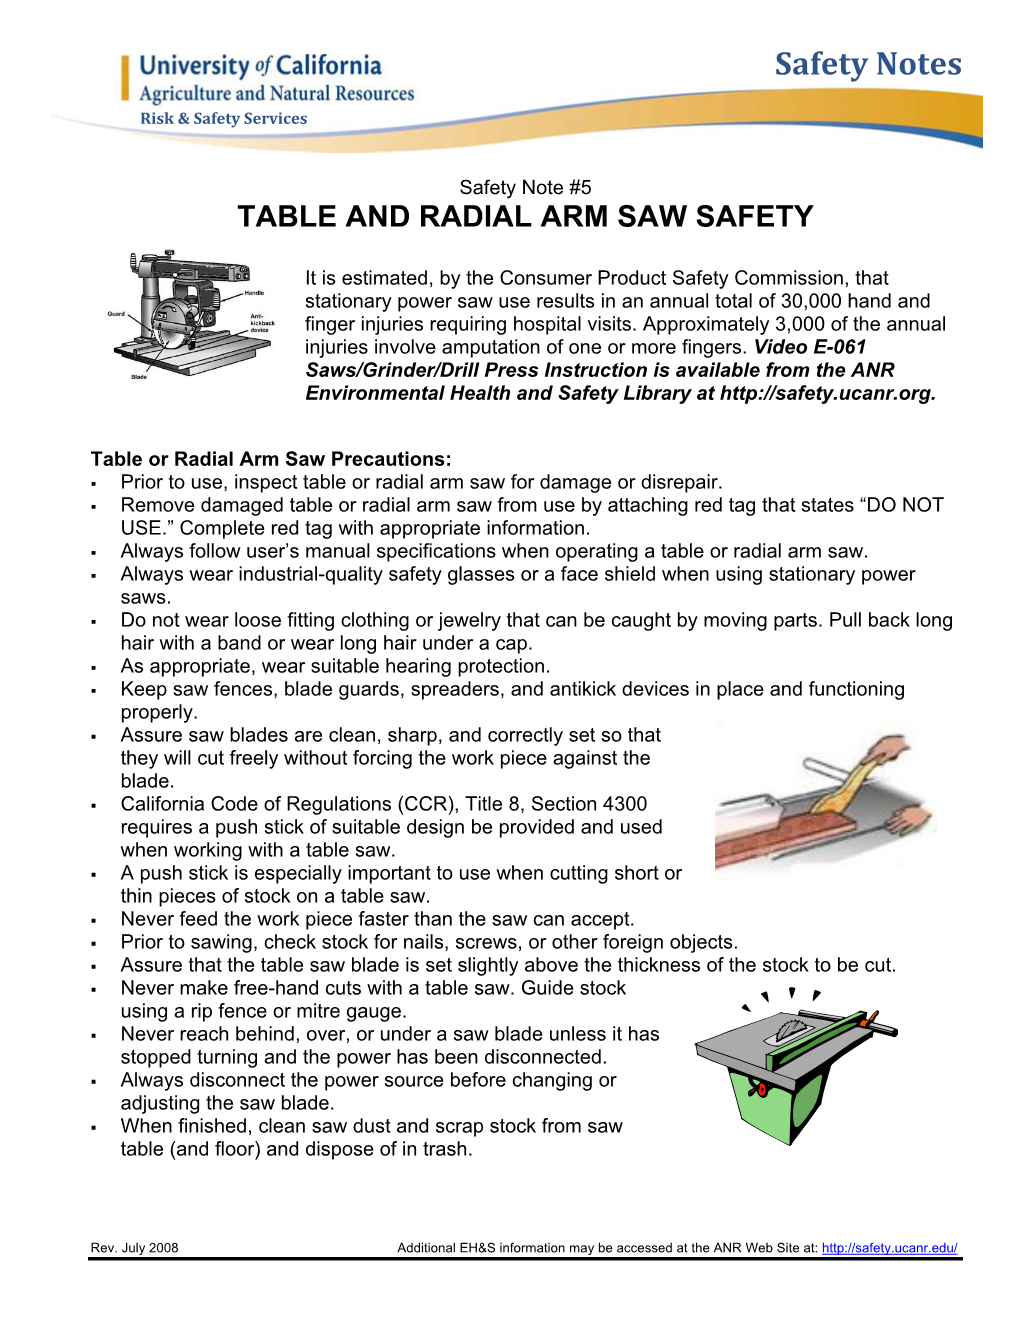 Table and Radial Arm Saw Safety